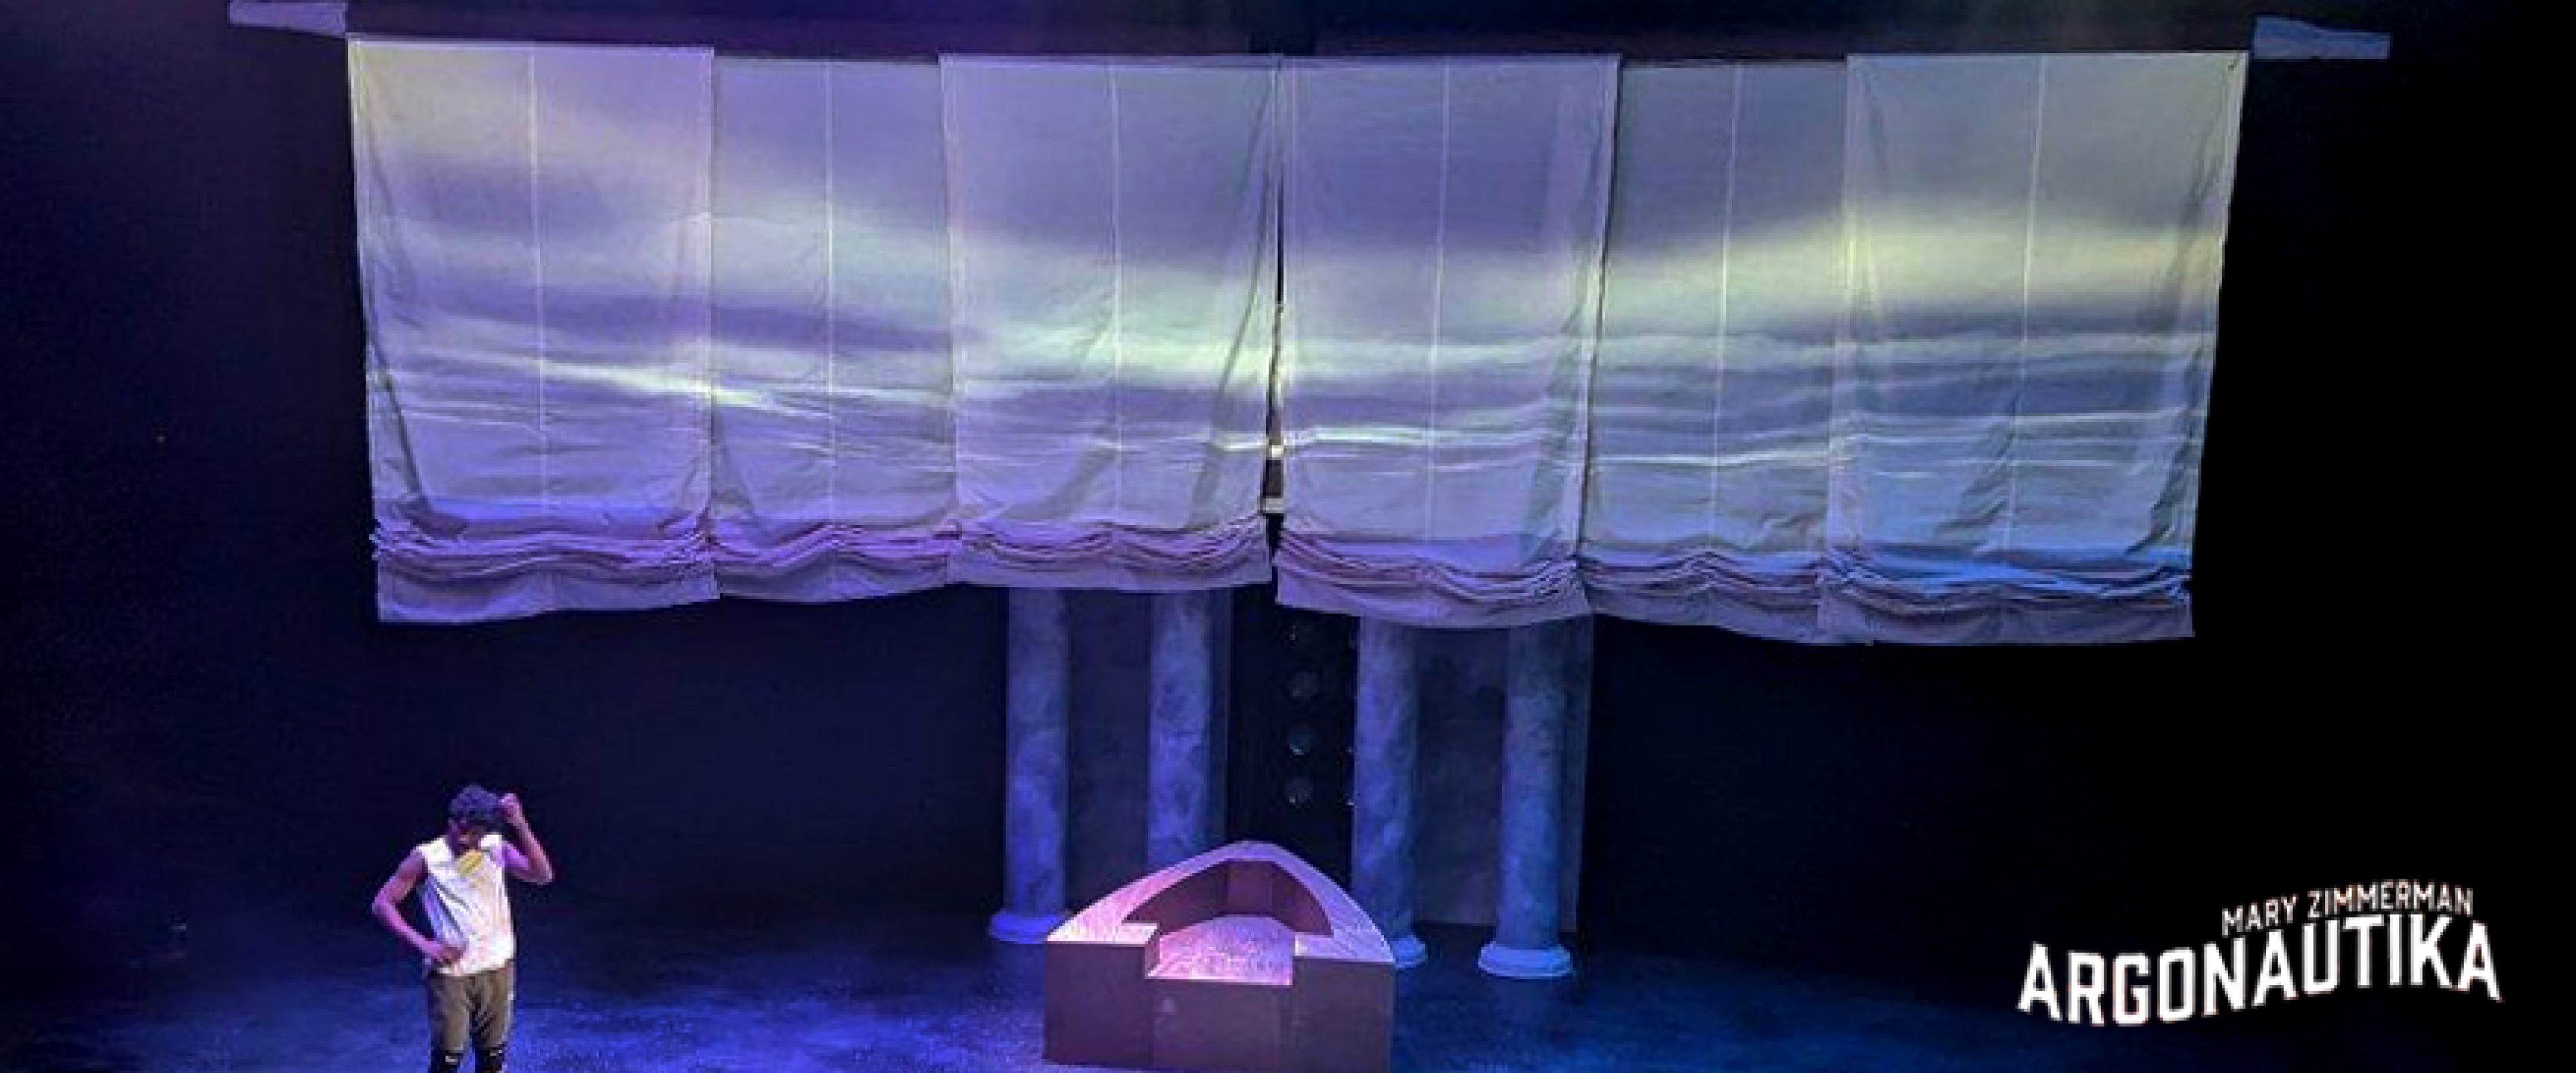 Projections of clouds for WMU Theatre's production of Argonautika by Mary Zimmerman